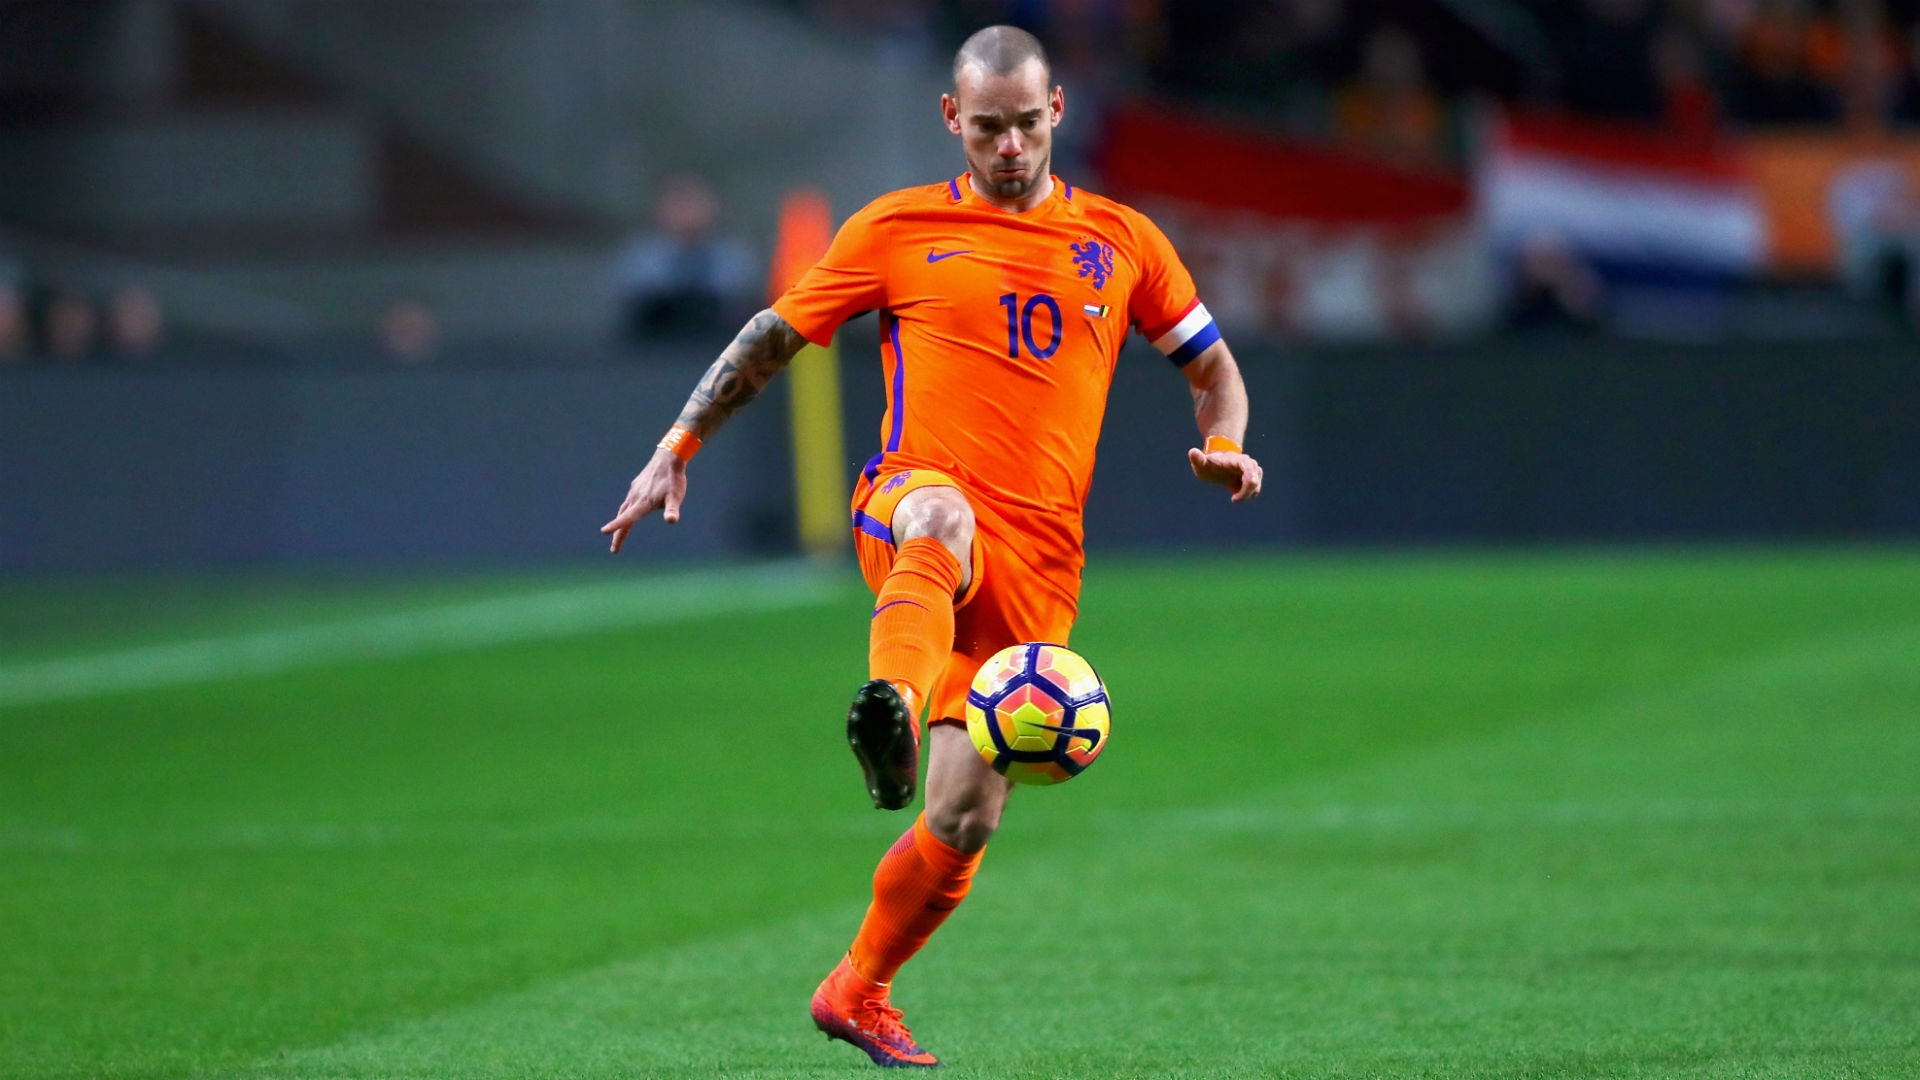 Sneijder played in Turkey for five seasons, winning two Super Lig trophies in the process.